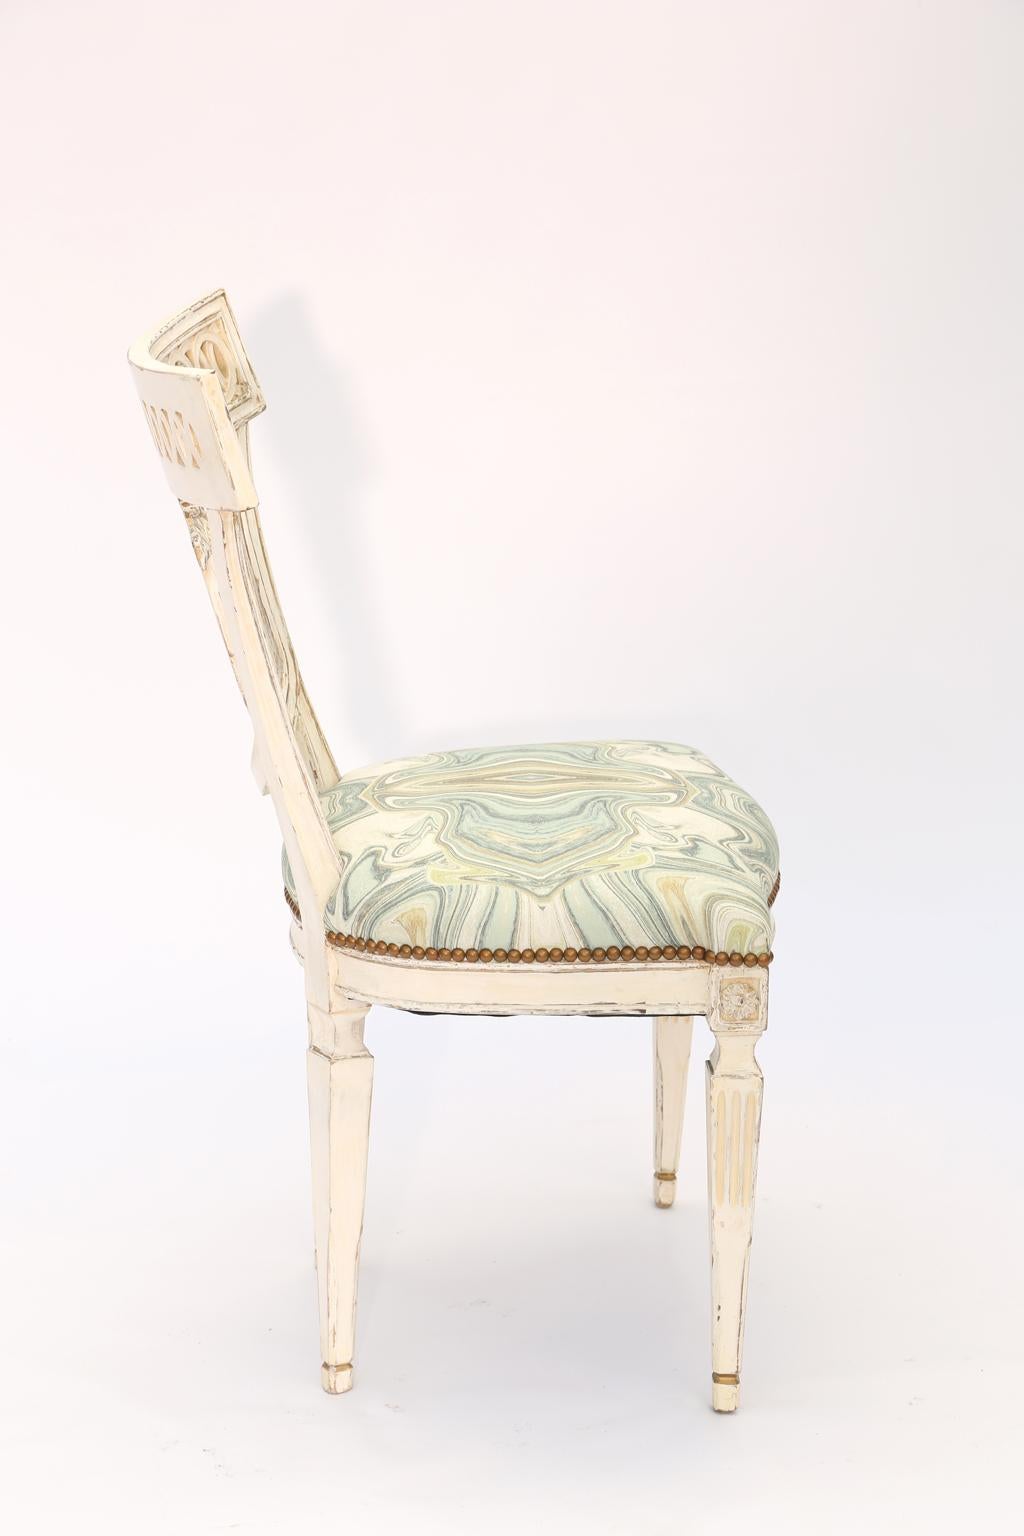 Side chair, having a painted finish, its toprail with pierced guilloche design, the spat a beaded, oval, cartouche, surmounted by a bow, its crown seat upholstered with nailheads, raised on square-section, tapering, fluted legs.

Stock ID: D1680.